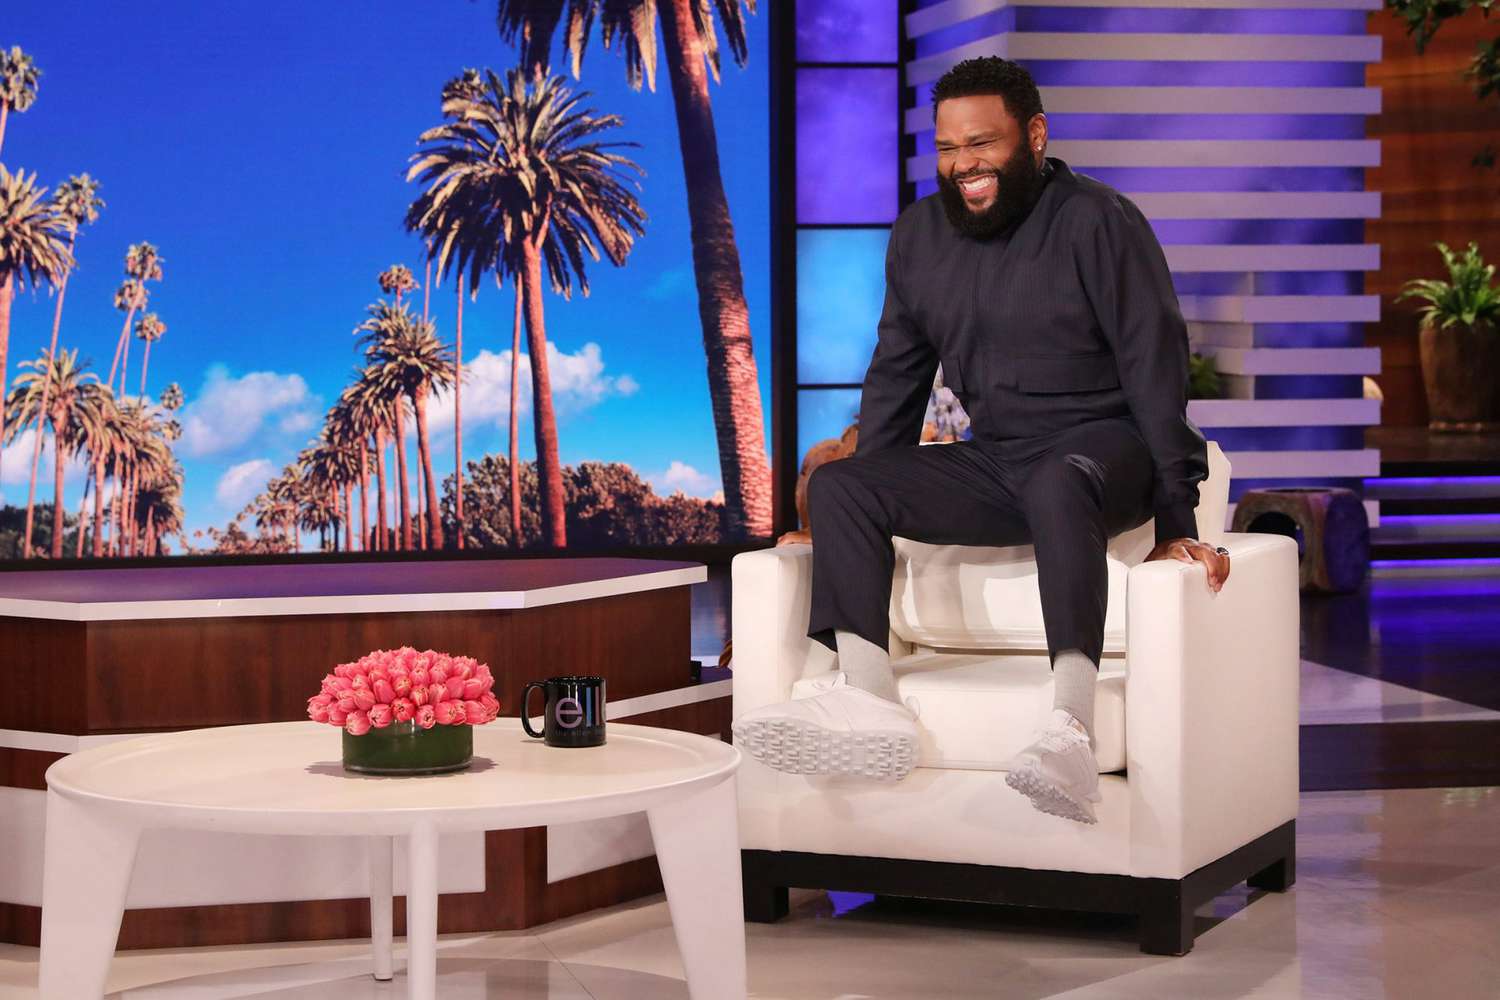 Emmy Award-nominated star of “Black-ish” Anthony Anderson guest hosts “The Ellen DeGeneres Show” airing Friday, April 30th.